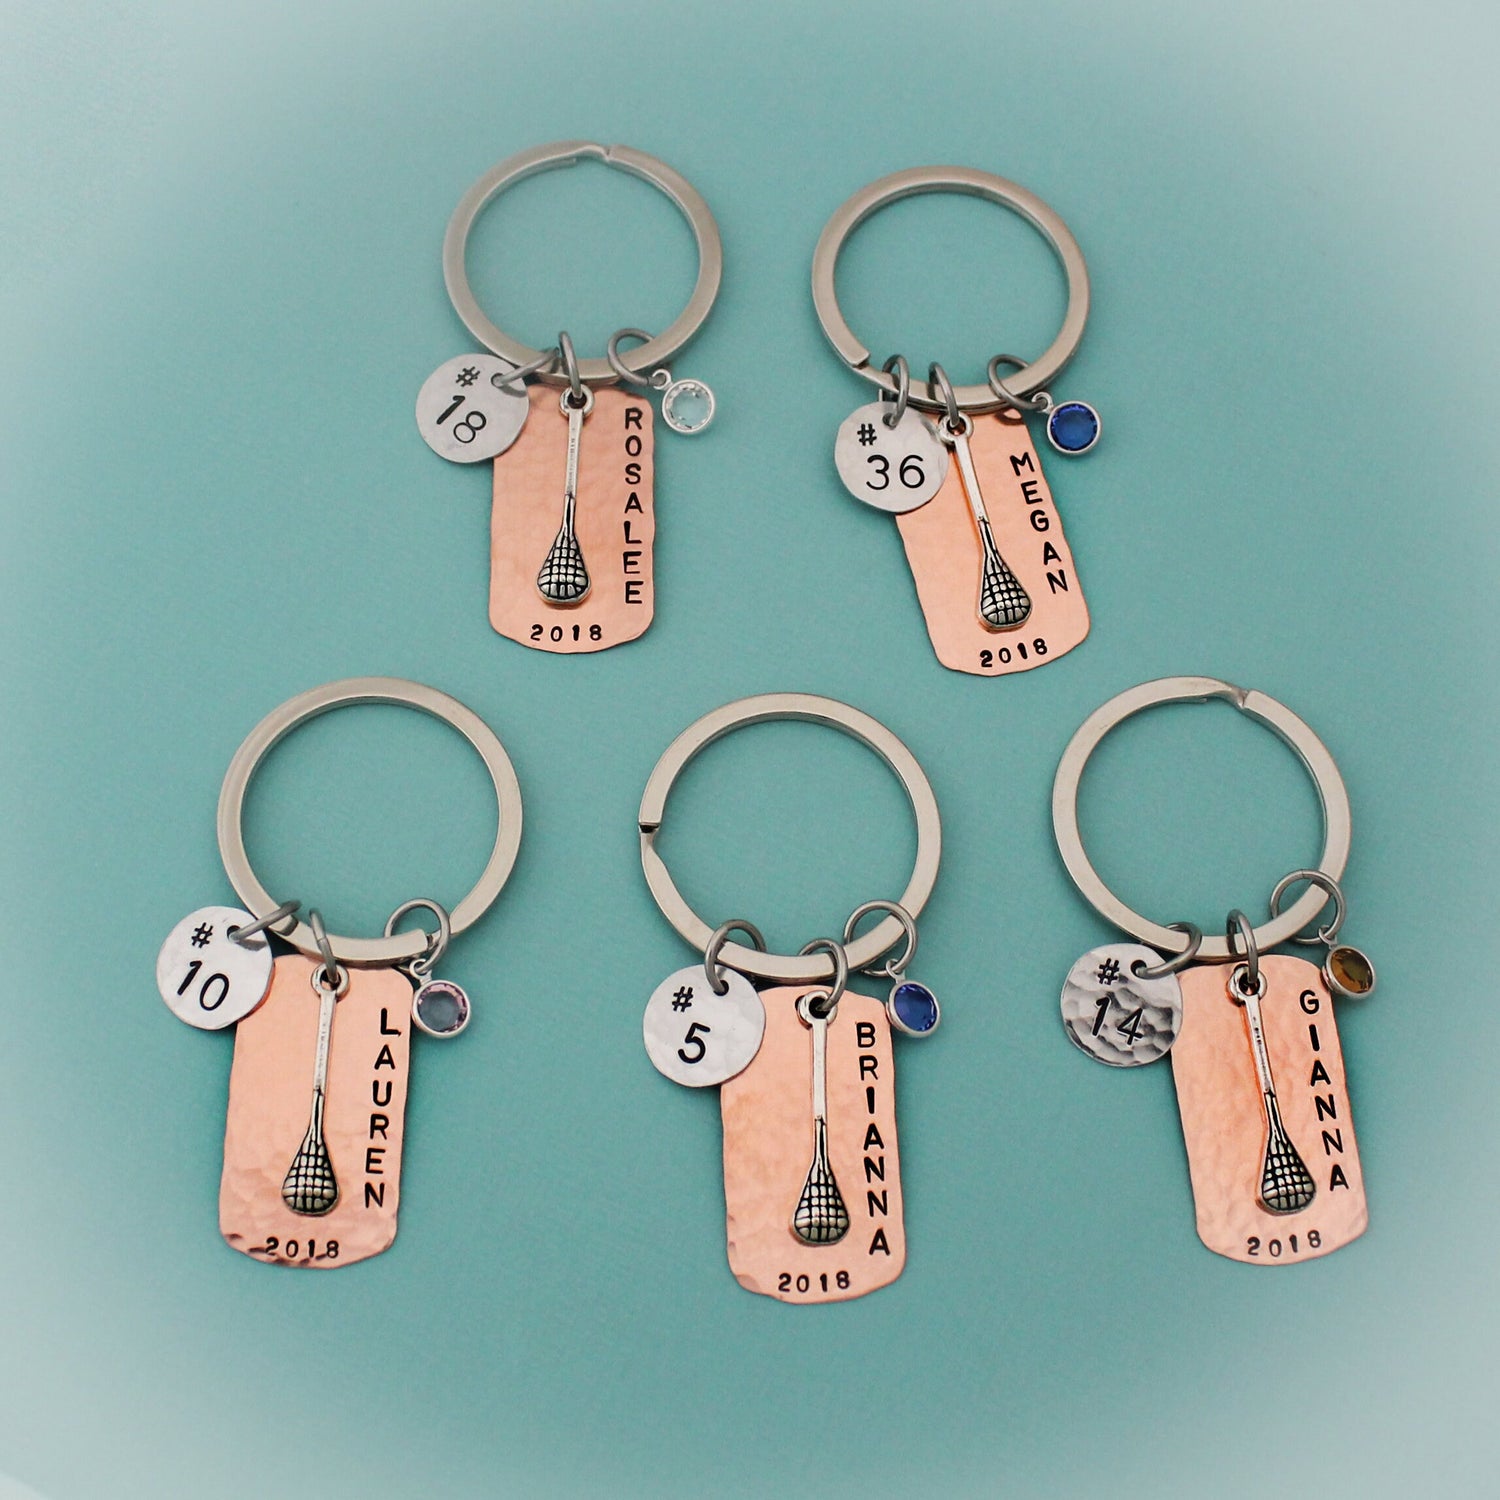 Personalized Lacrosse Team Keychain, LAX Team Gift, Copper Lacrosse Keychain, Personalized Lacrosse Keychain, Team Gift, Hand Stamped